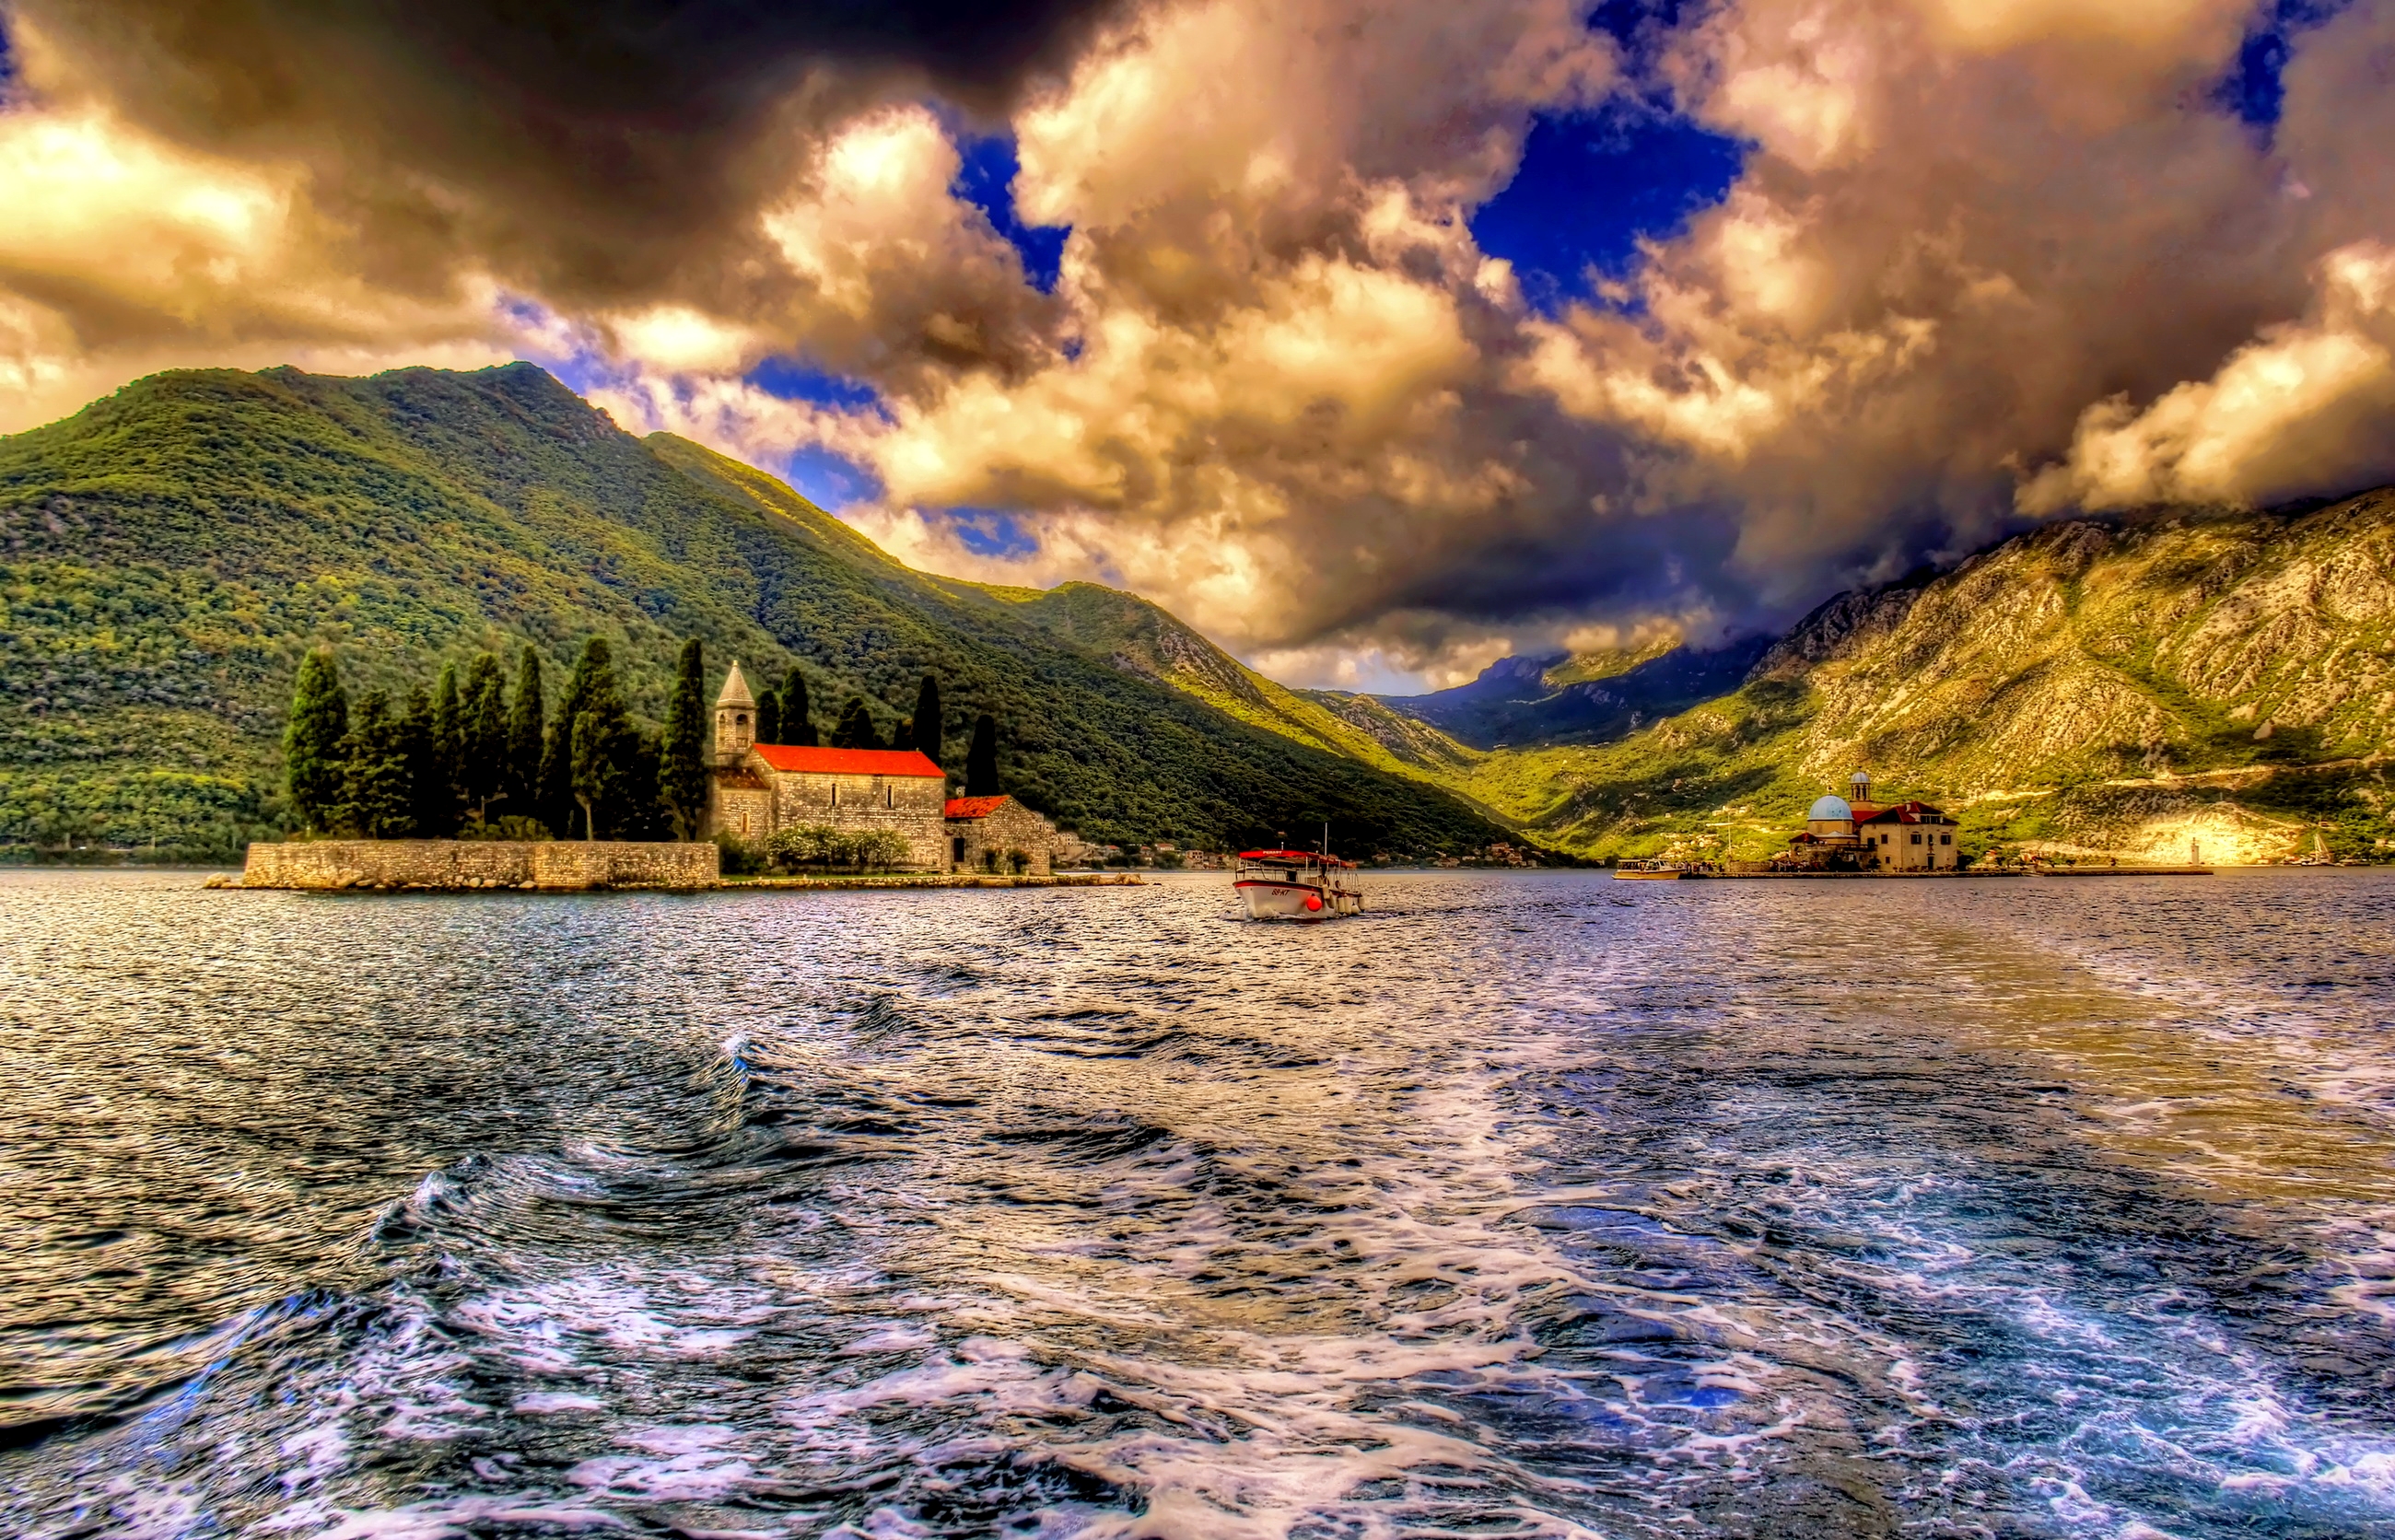 Free download wallpaper Sky, Mountain, Lake, Village, Boat, Hdr, Cloud, Man Made, Kloster on your PC desktop